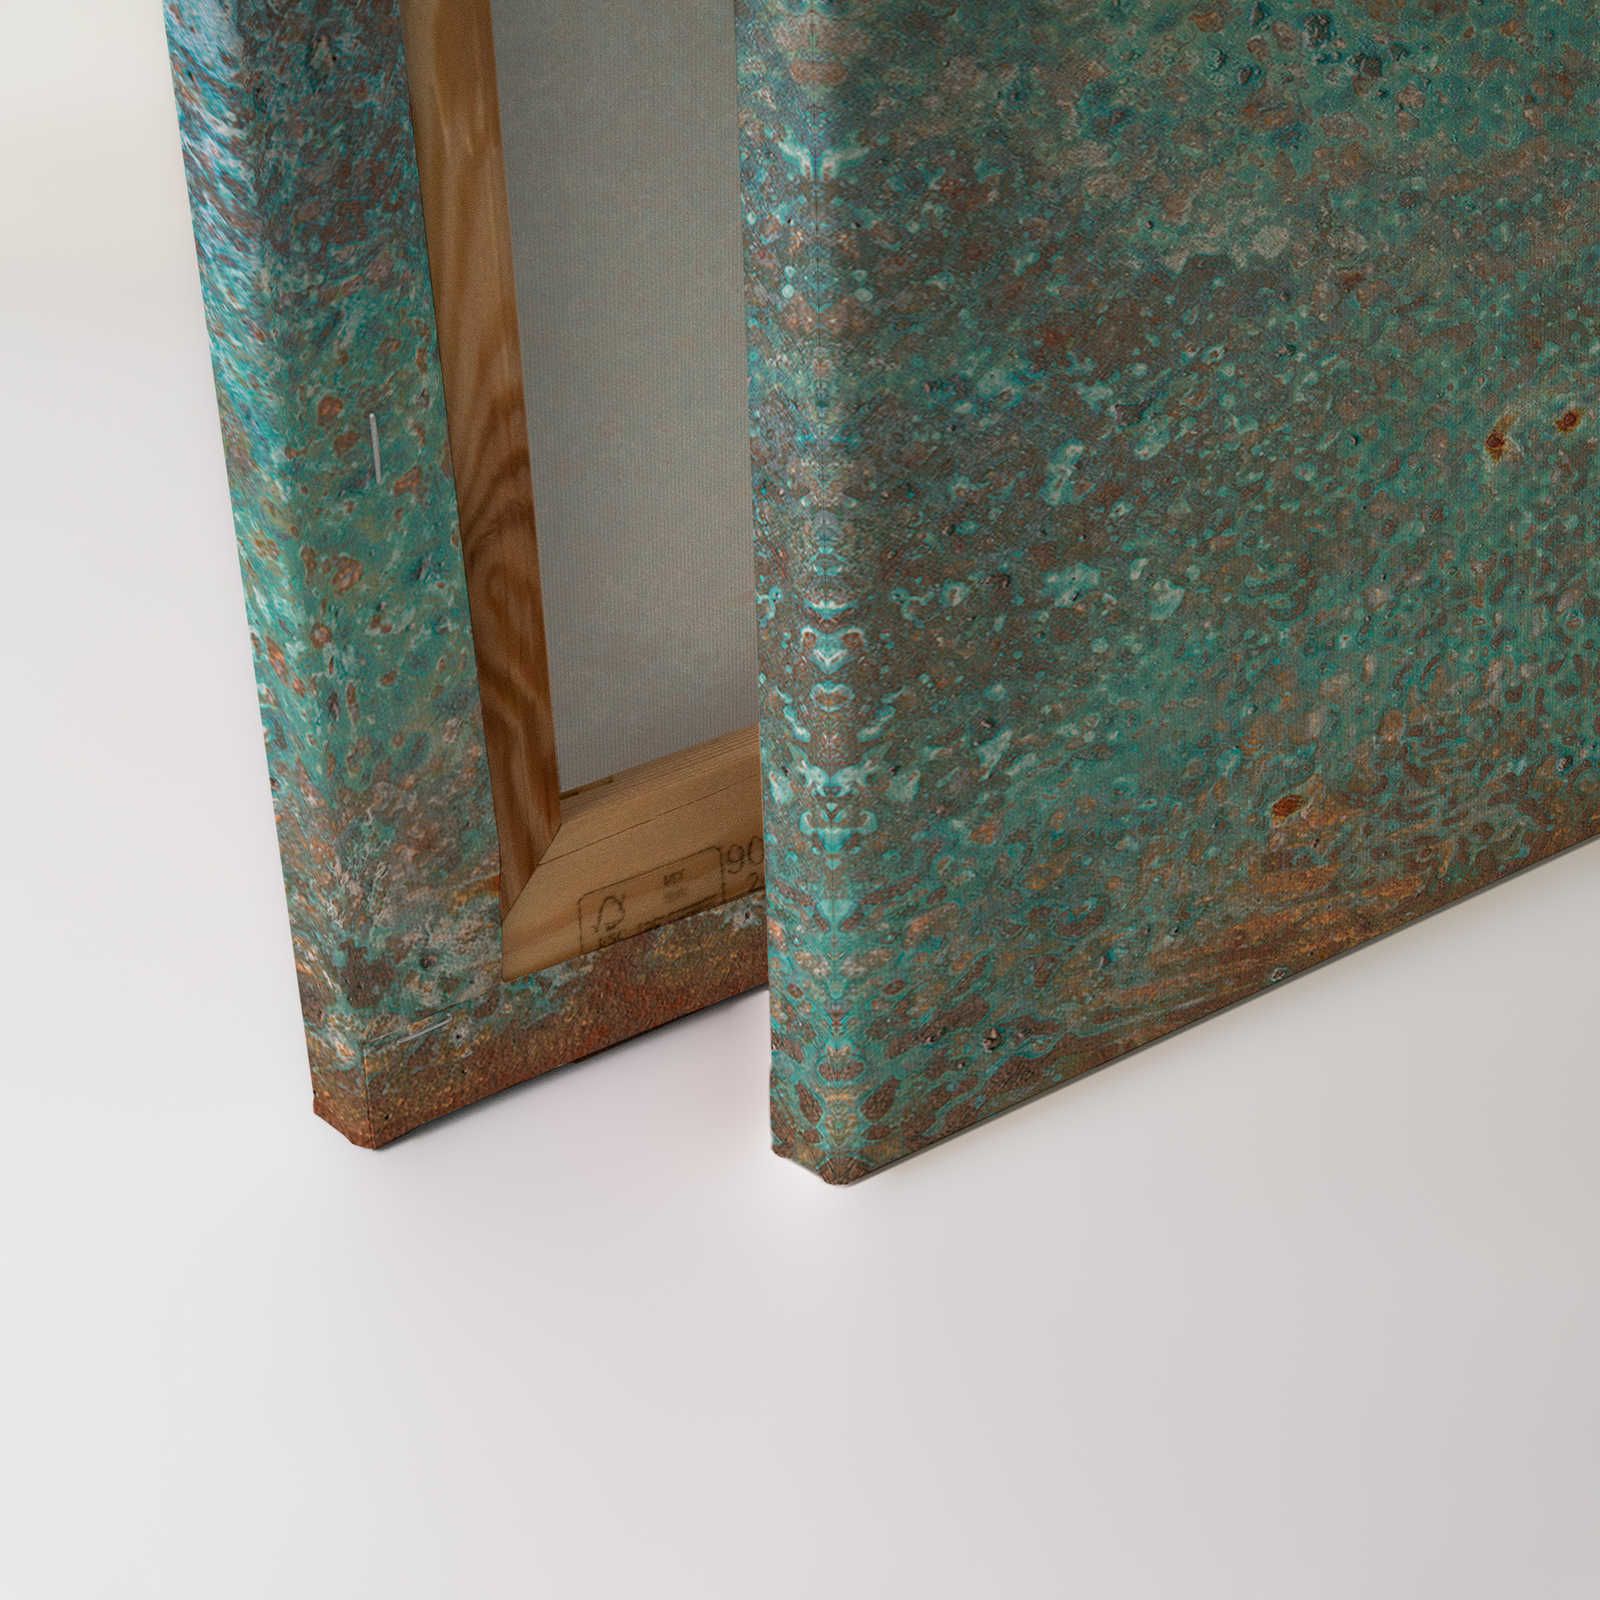             Metal Optics Canvas Painting Turquoise Patina with Rust - 1.20 m x 0.80 m
        